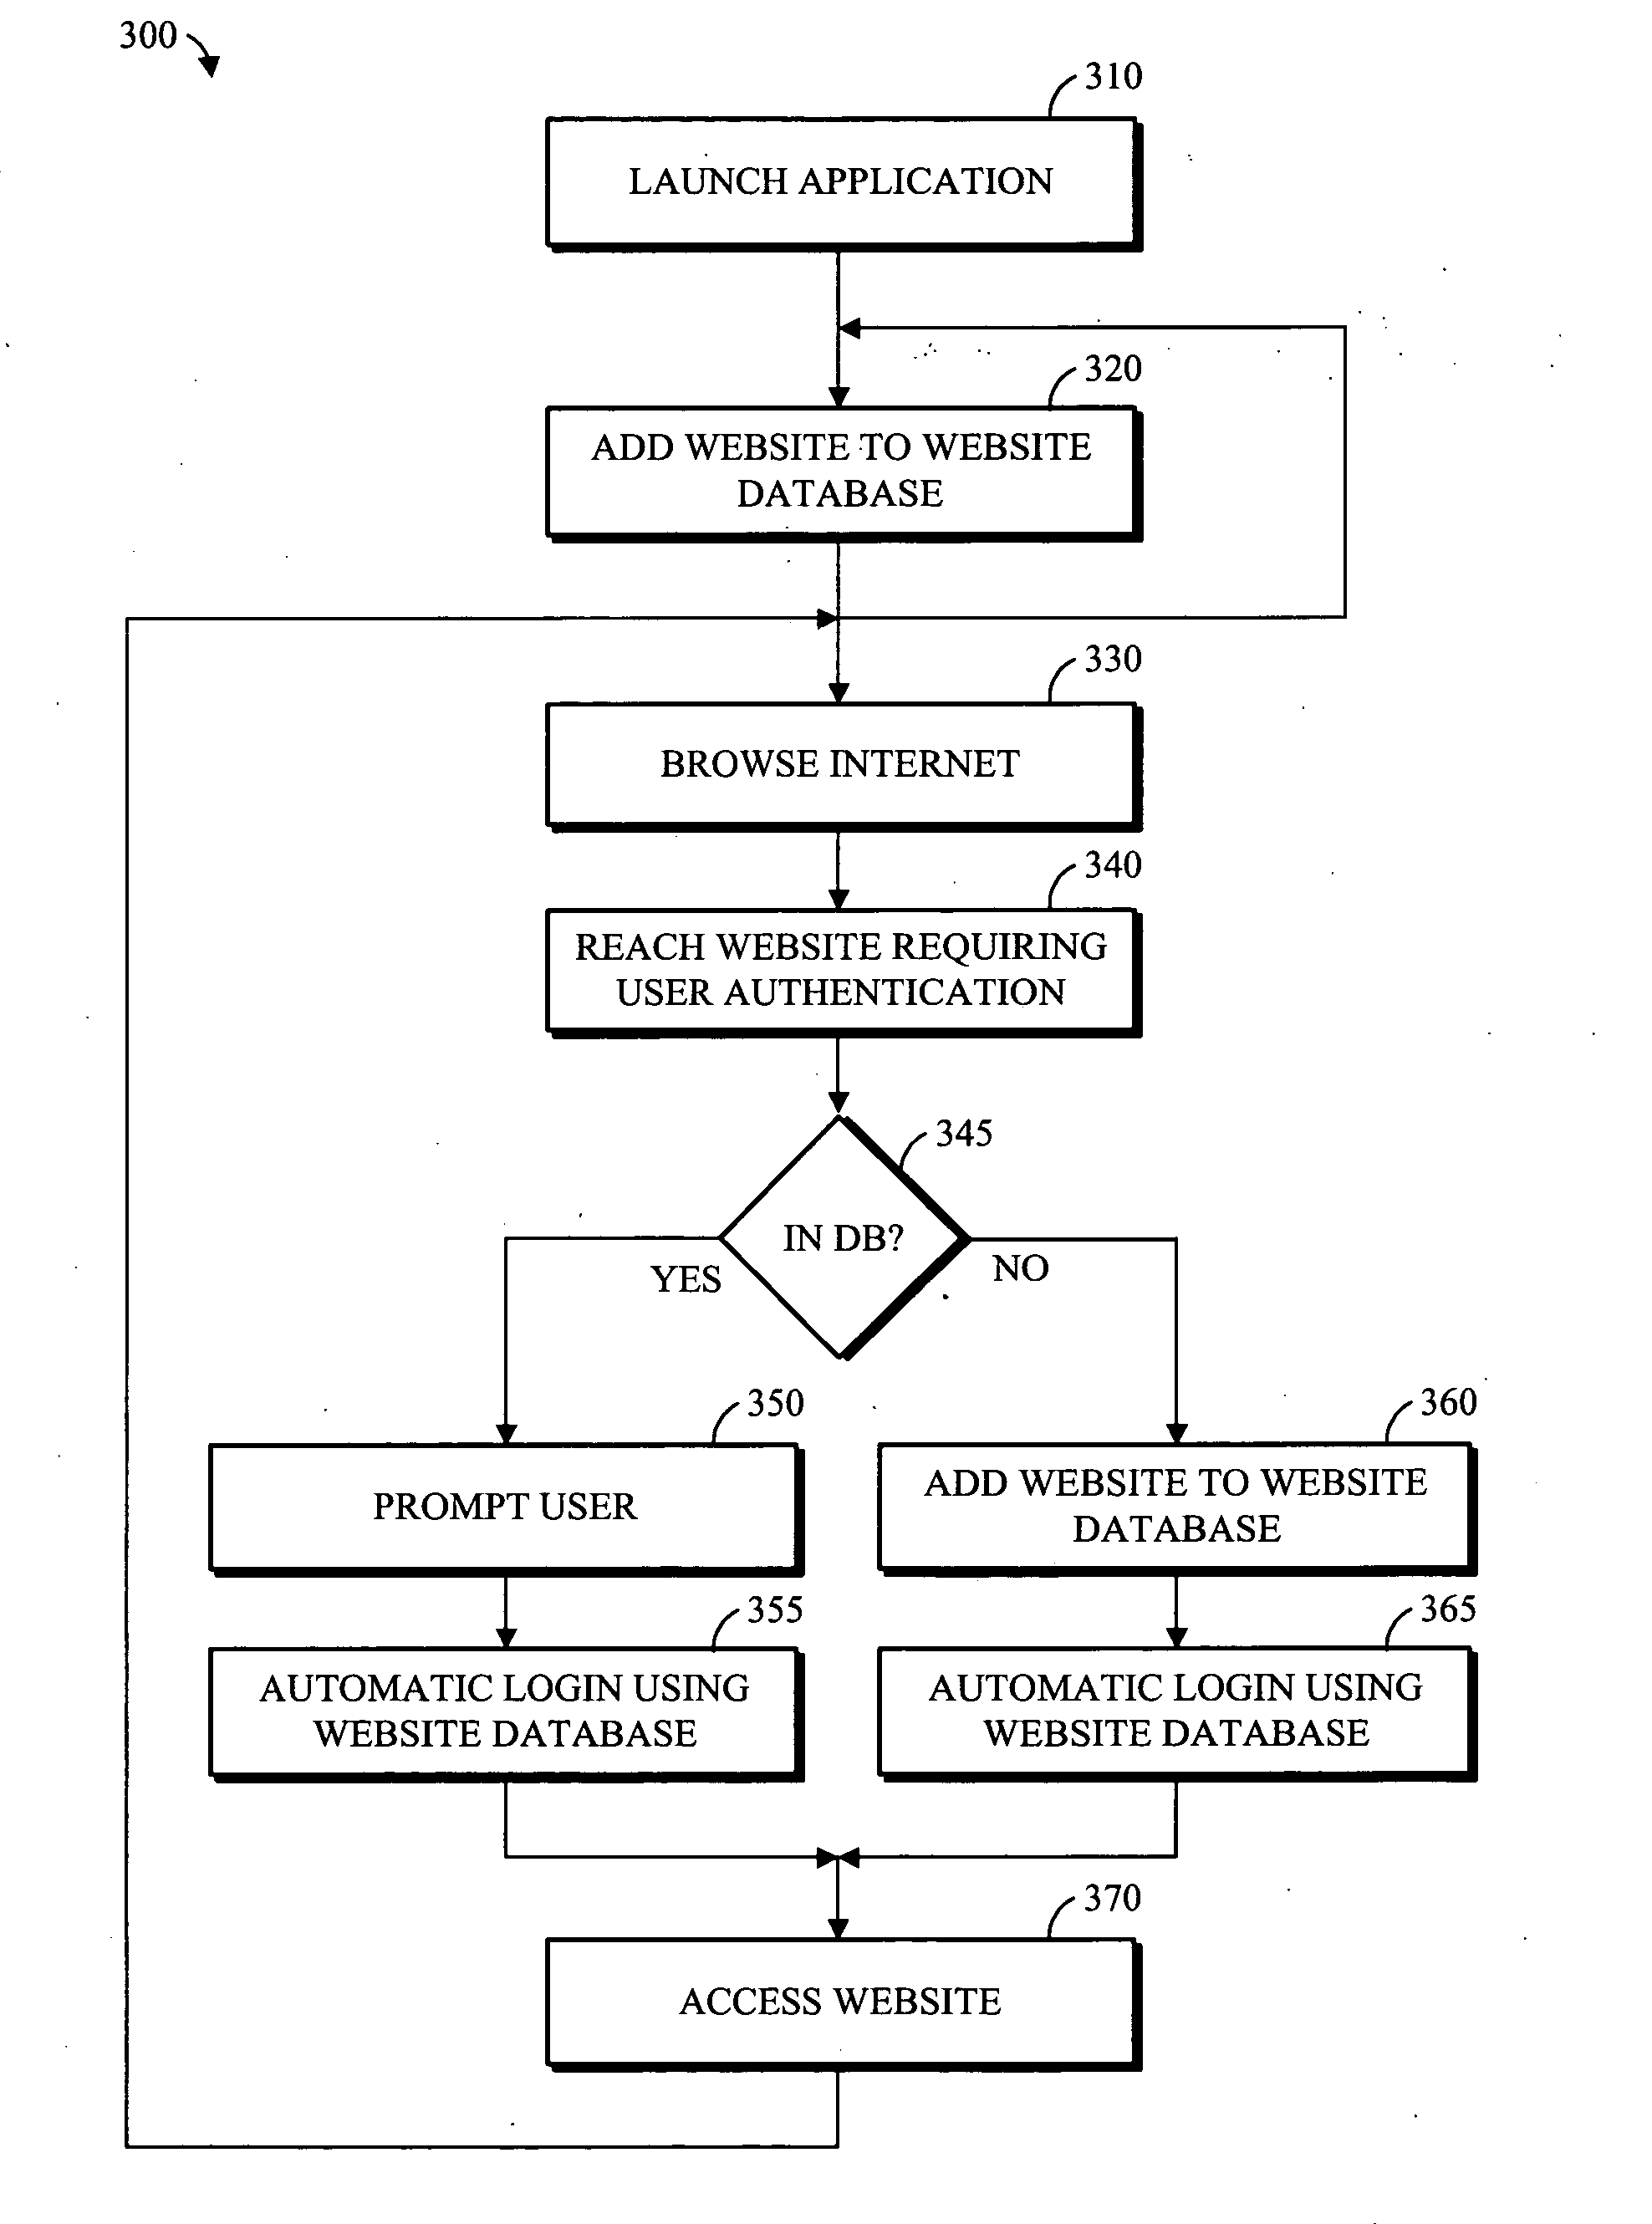 Apparatus and method for convenient and secure access to websites